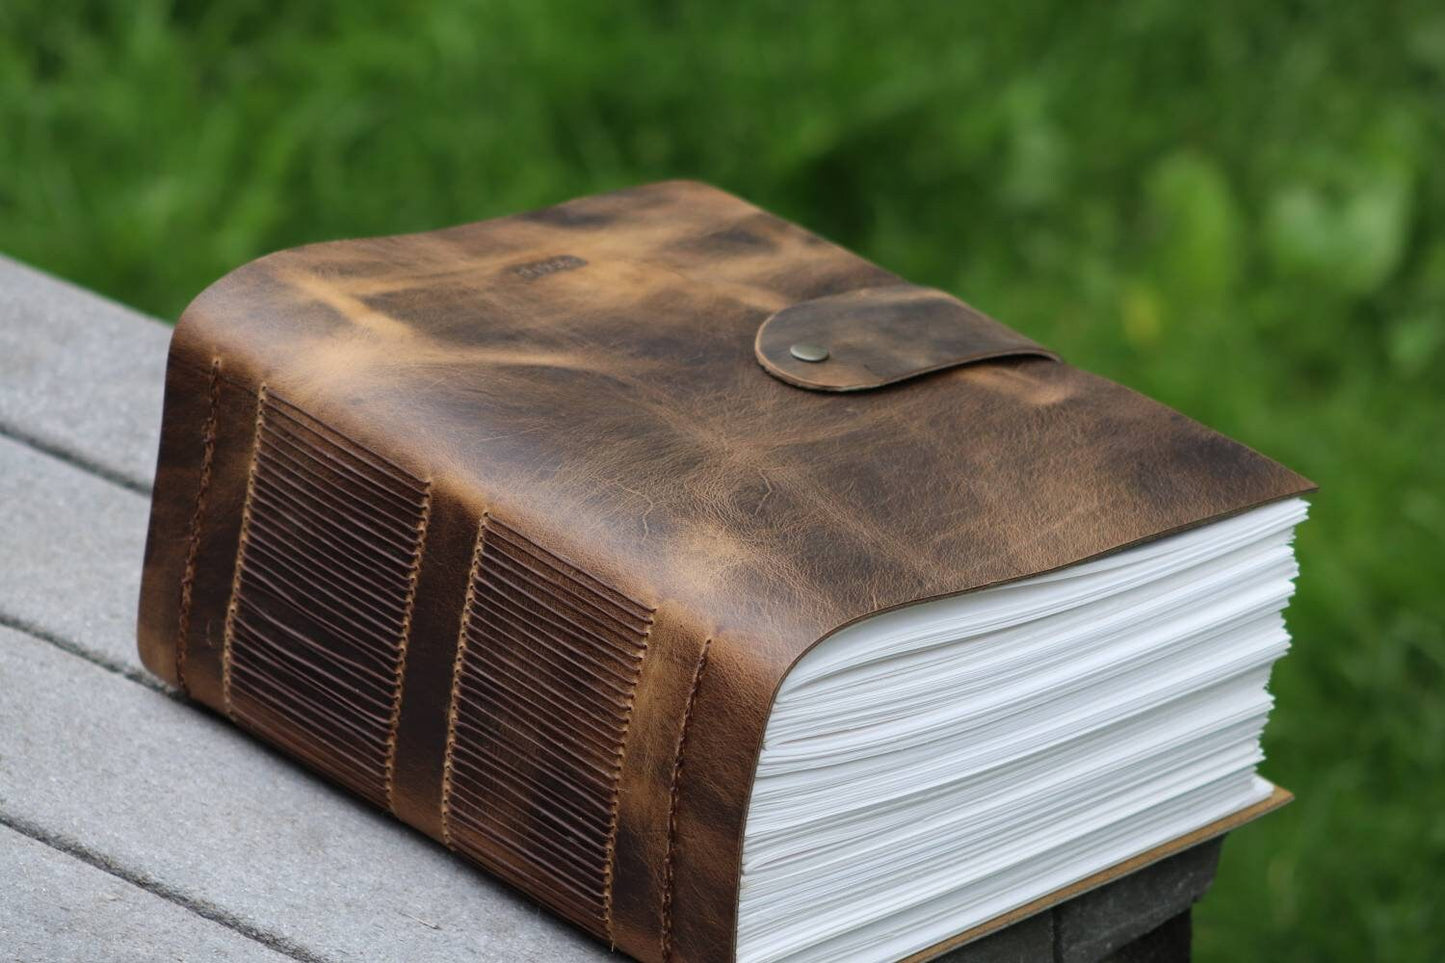 THE MASSIVE - Giant Leather Family Tome, Big Huge Rustic Heirloom Keepsake Book, Large Premium Personalized Memory Journal, Lined, Blank